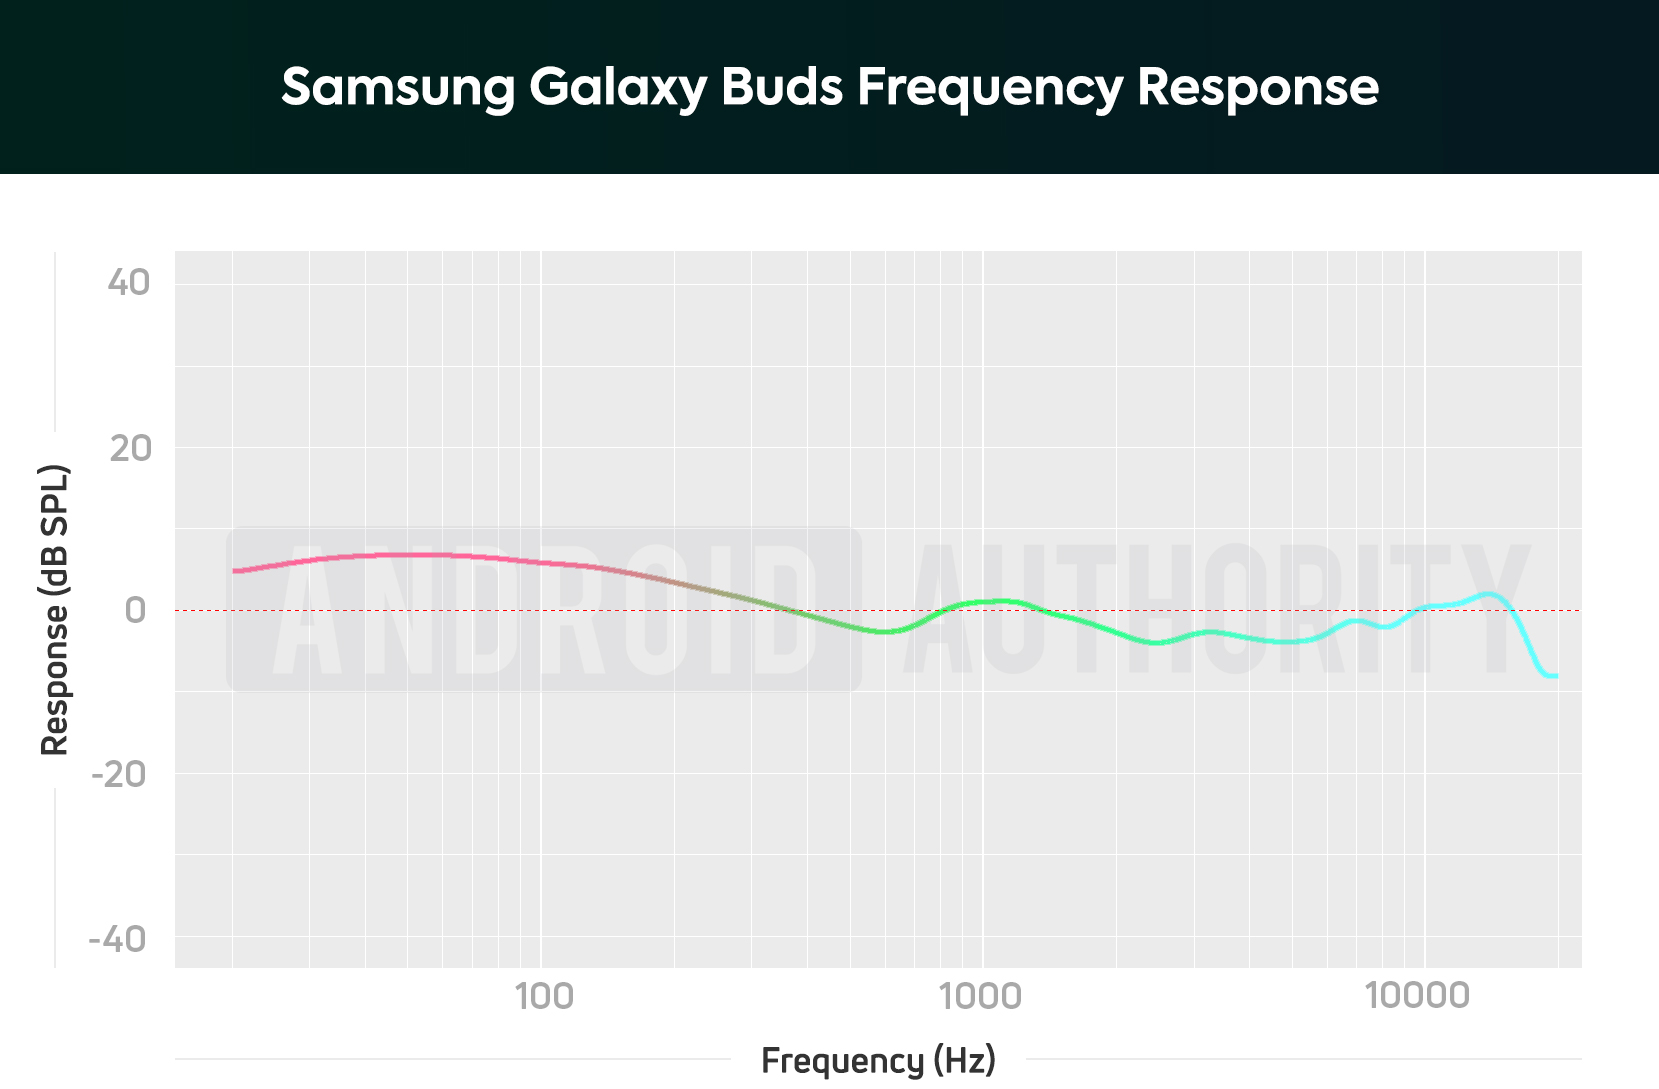 Samsung Galaxy Buds AA frequency response chart